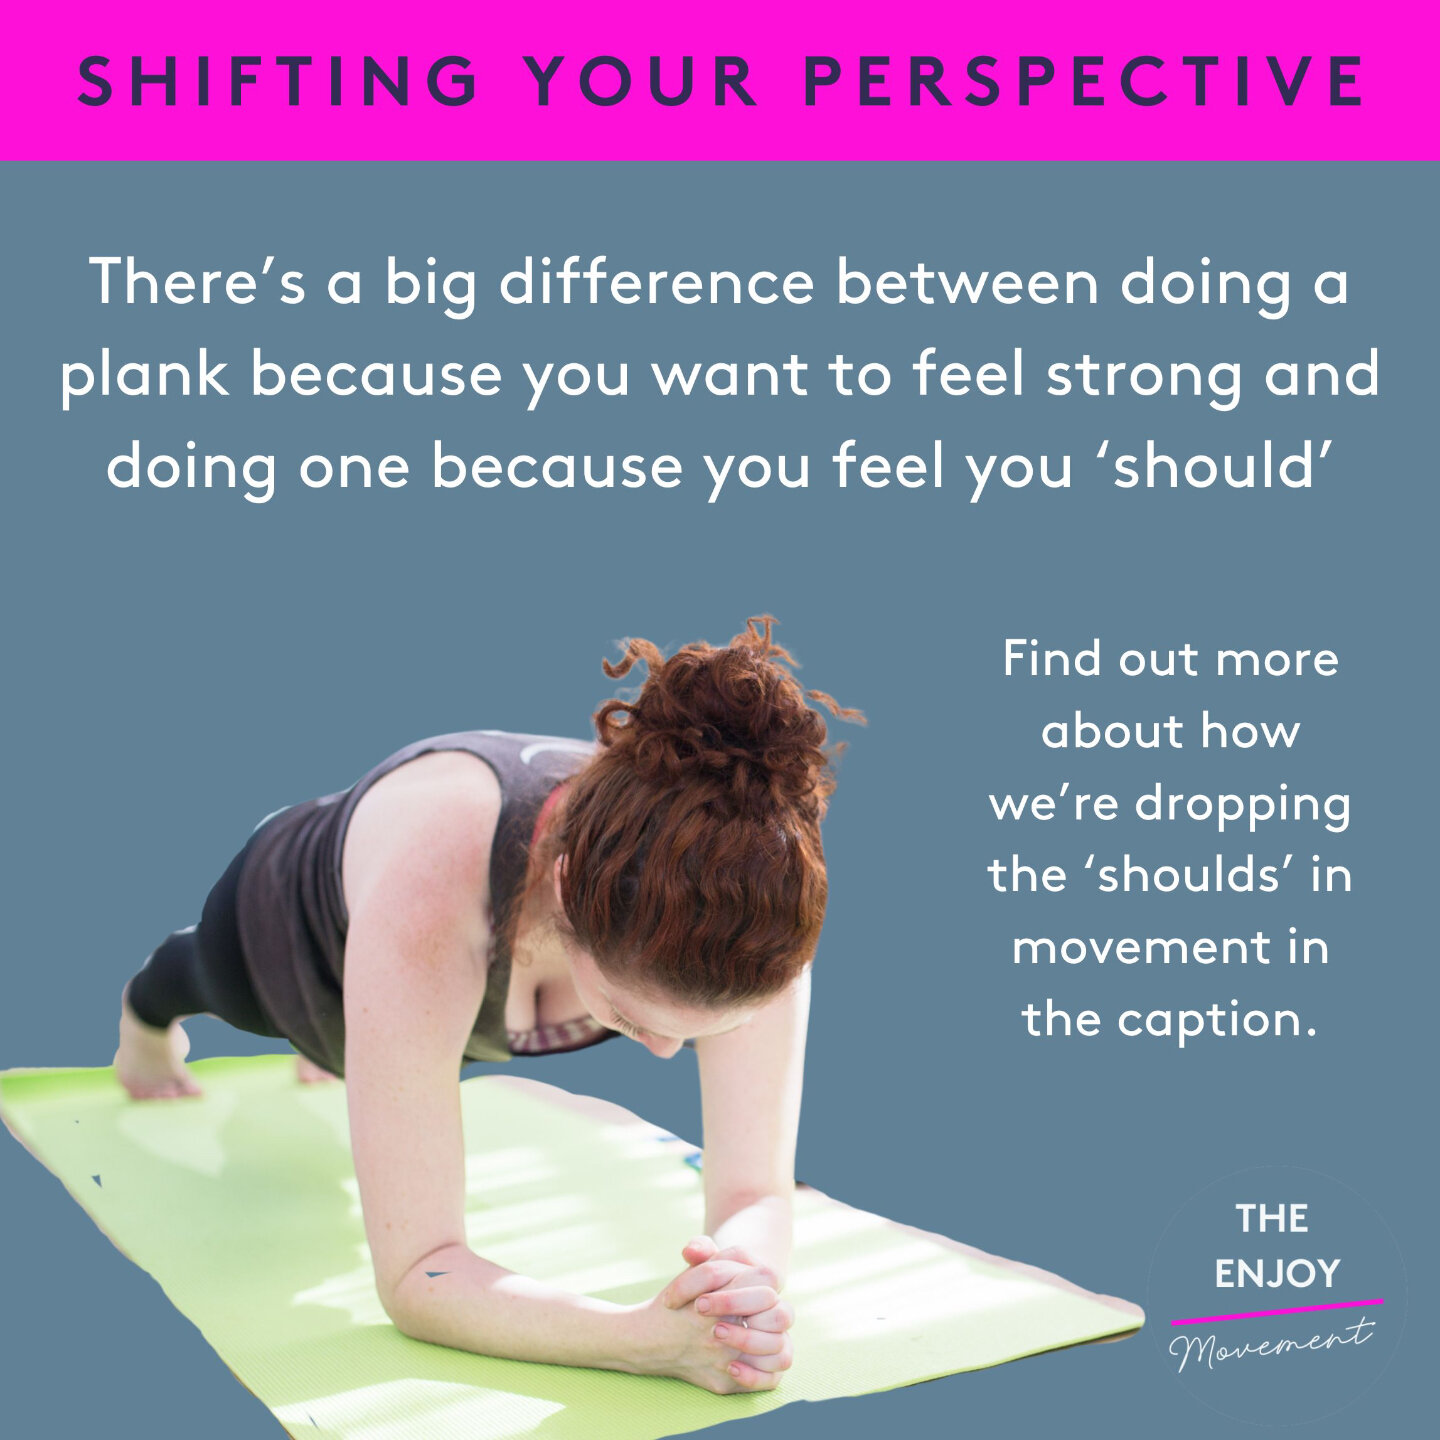 ✨Shifting your perspective on exercise✨

There&rsquo;s a big industry built up around the concept of working out as a chore, as a way to &lsquo;make up&rsquo; for what you&rsquo;ve eaten or to become the strongest/fittest/fastest and because you &lsq